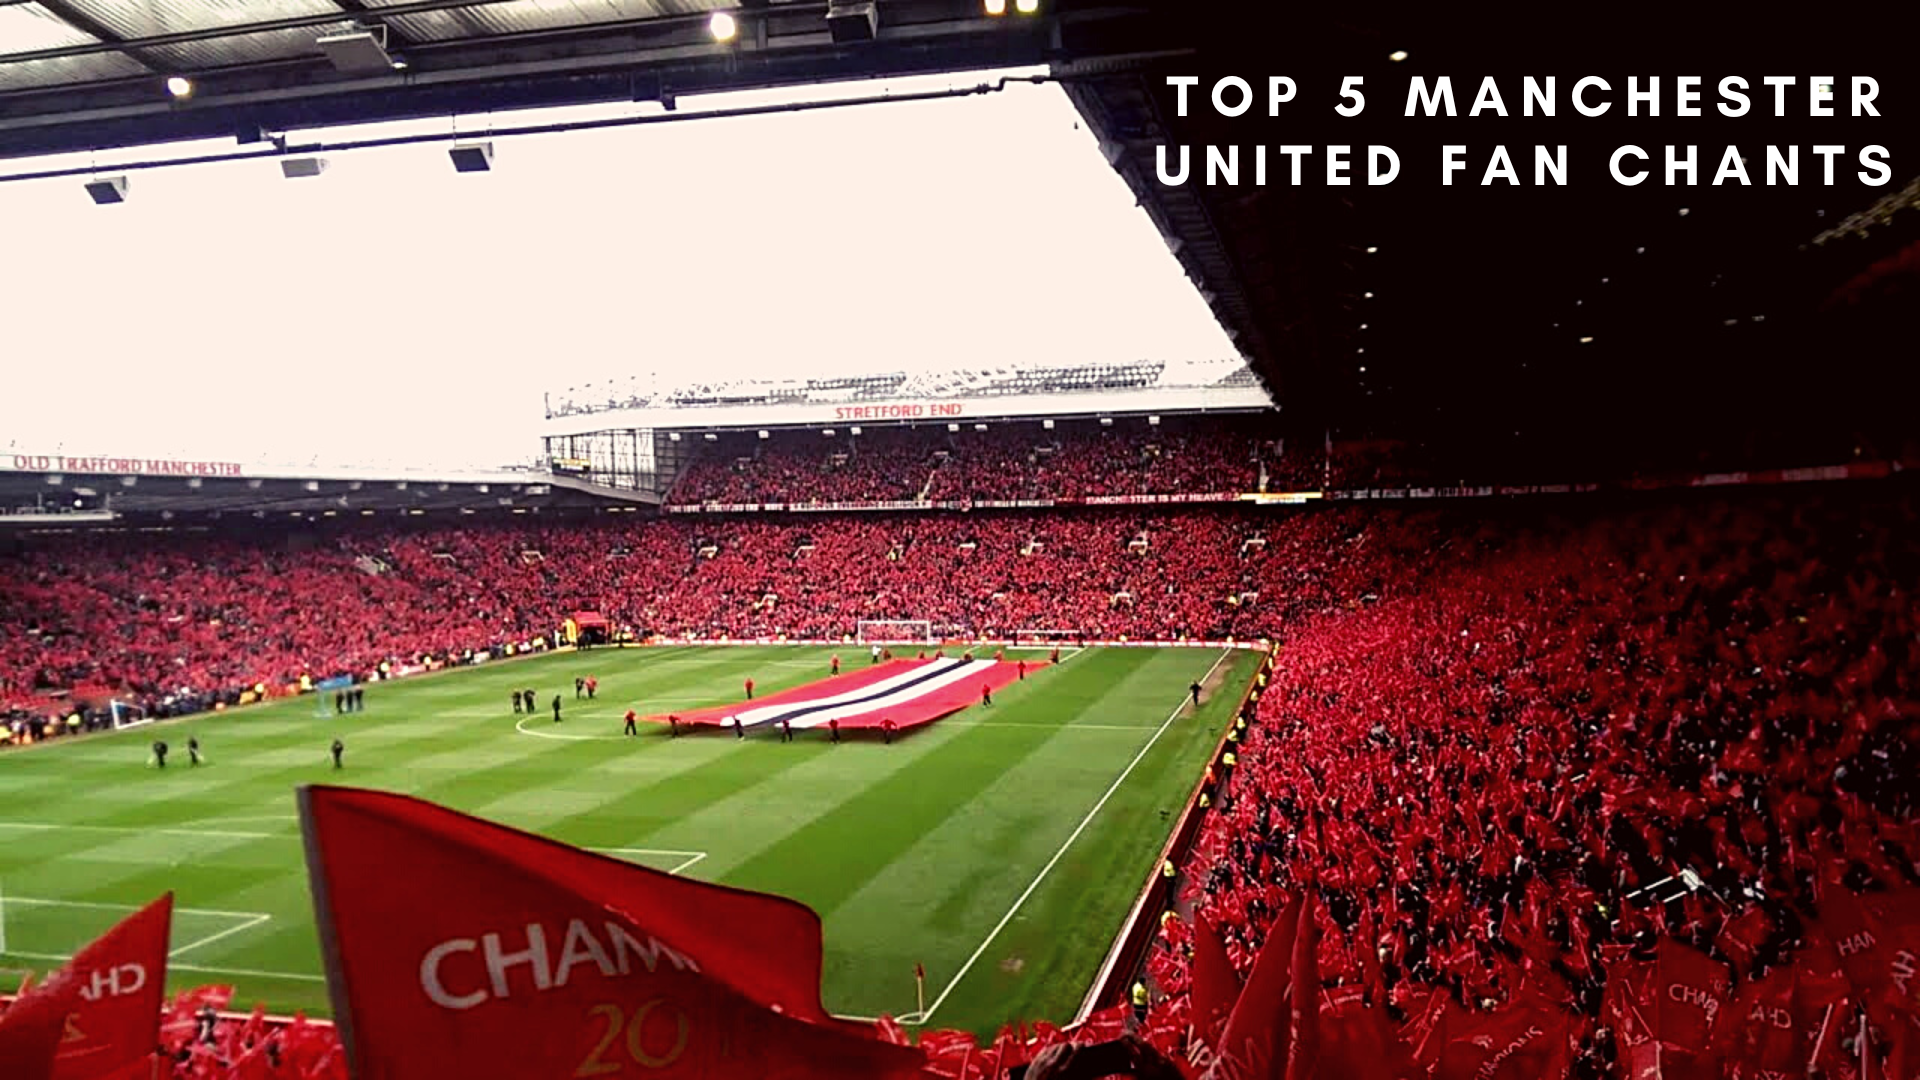 Here are the top 5 Manchester United fan chants. (Credit: YouTube/ Adam Ward)